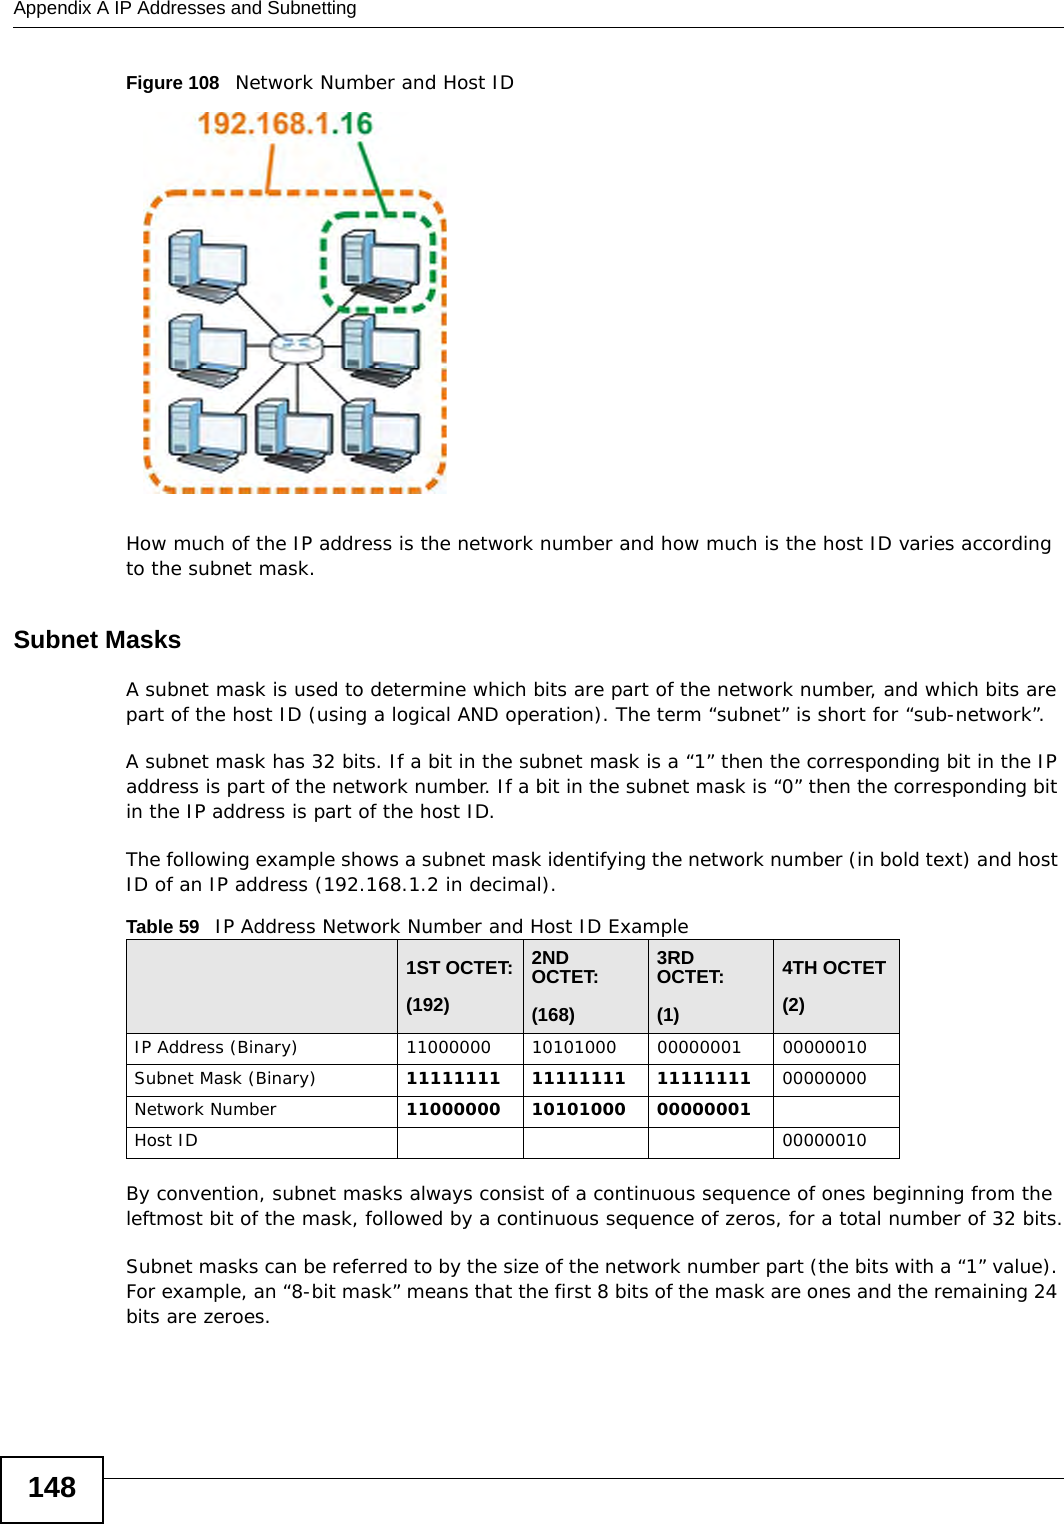 Appendix A IP Addresses and Subnetting148Figure 108   Network Number and Host IDHow much of the IP address is the network number and how much is the host ID varies according to the subnet mask.  Subnet MasksA subnet mask is used to determine which bits are part of the network number, and which bits are part of the host ID (using a logical AND operation). The term “subnet” is short for “sub-network”.A subnet mask has 32 bits. If a bit in the subnet mask is a “1” then the corresponding bit in the IP address is part of the network number. If a bit in the subnet mask is “0” then the corresponding bit in the IP address is part of the host ID. The following example shows a subnet mask identifying the network number (in bold text) and host ID of an IP address (192.168.1.2 in decimal).By convention, subnet masks always consist of a continuous sequence of ones beginning from the leftmost bit of the mask, followed by a continuous sequence of zeros, for a total number of 32 bits.Subnet masks can be referred to by the size of the network number part (the bits with a “1” value). For example, an “8-bit mask” means that the first 8 bits of the mask are ones and the remaining 24 bits are zeroes.Table 59   IP Address Network Number and Host ID Example1ST OCTET:(192)2ND OCTET:(168)3RD OCTET:(1)4TH OCTET(2)IP Address (Binary) 11000000 10101000 00000001 00000010Subnet Mask (Binary) 11111111 11111111 11111111 00000000Network Number 11000000 10101000 00000001Host ID 00000010